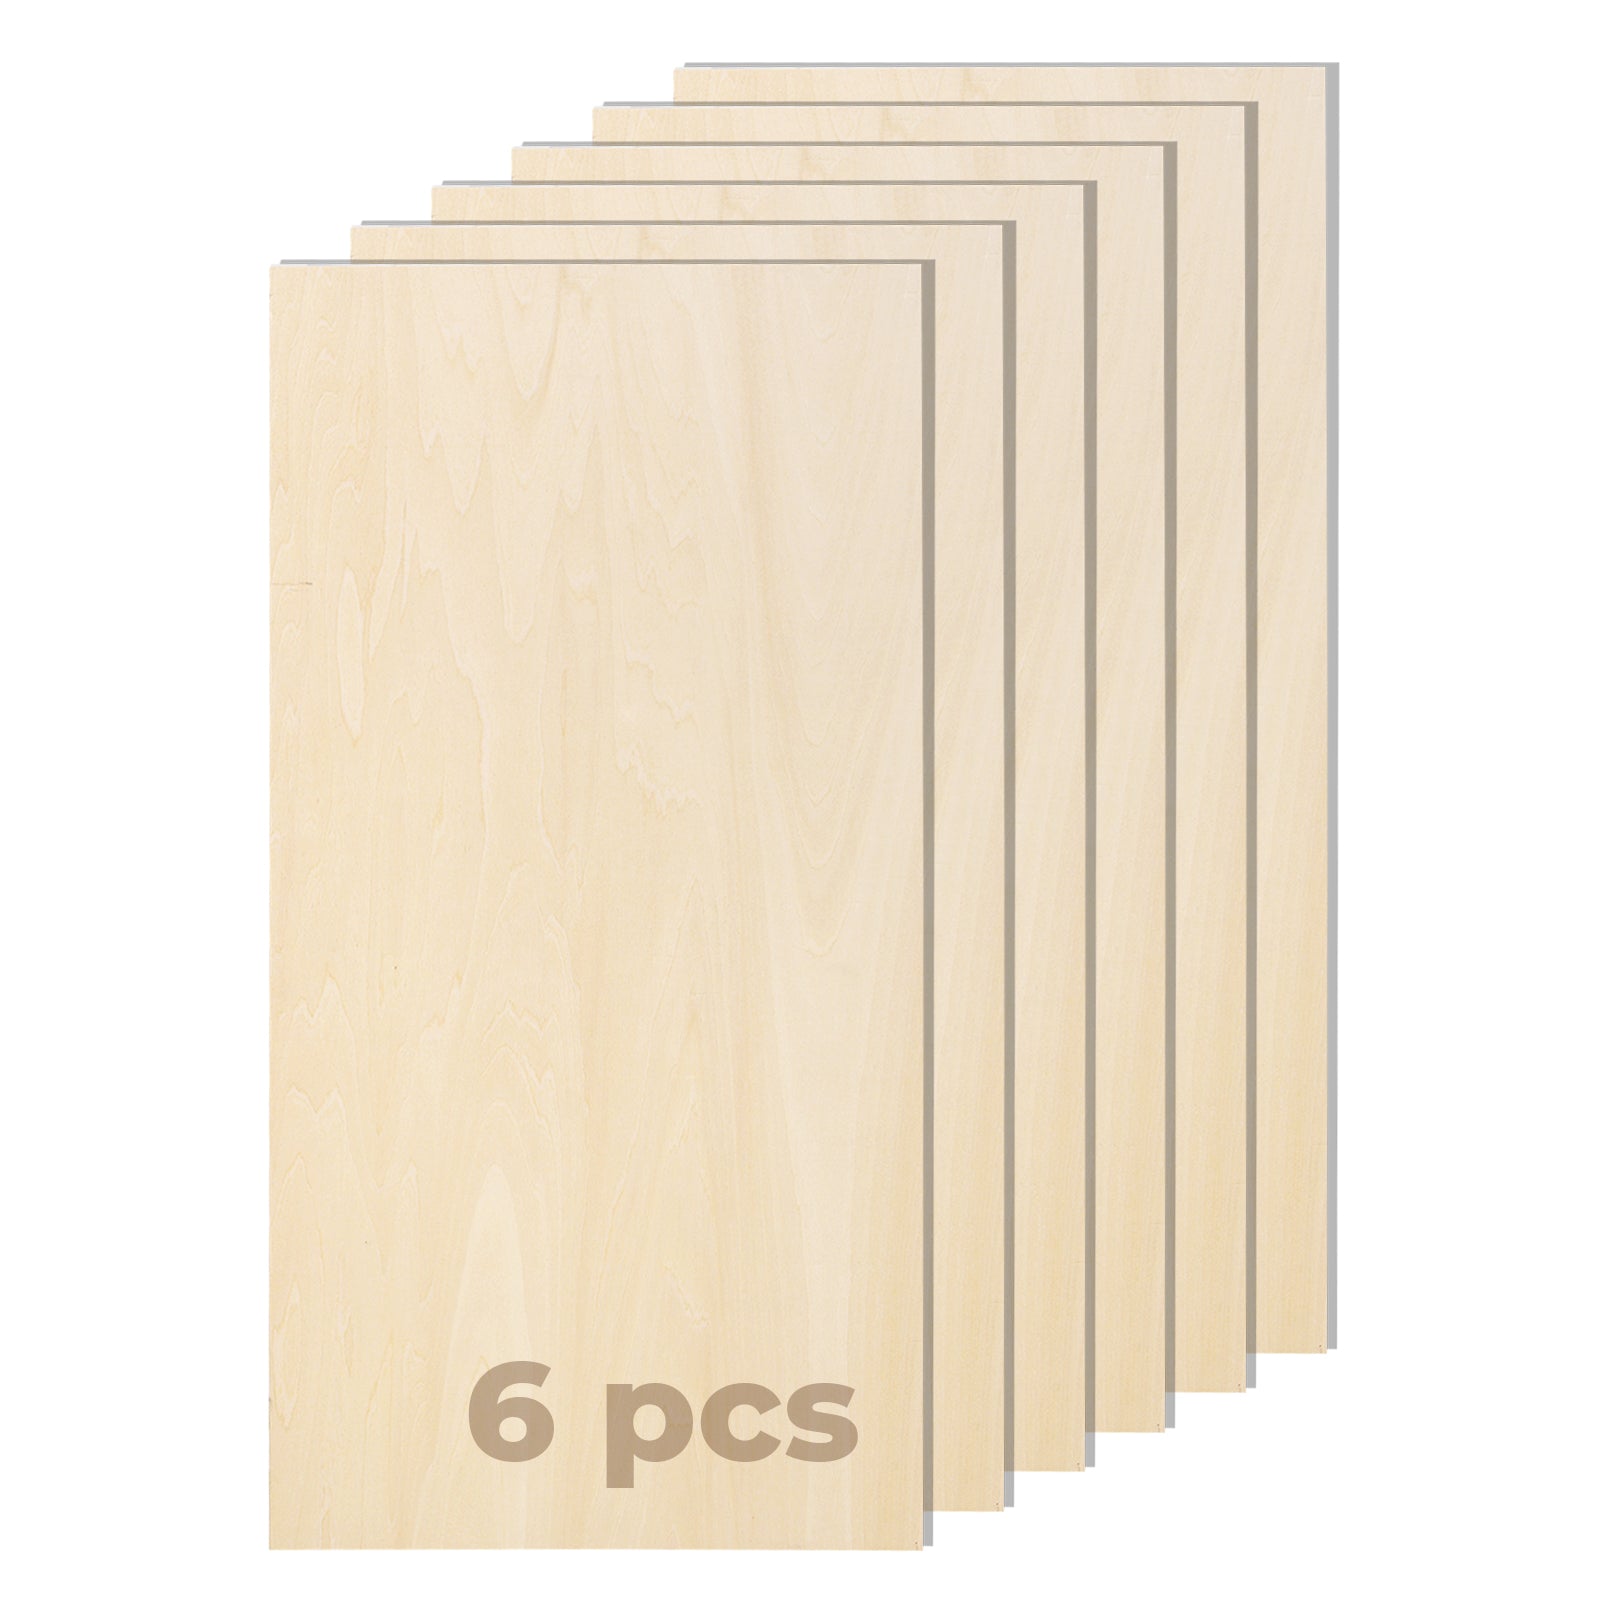 Basswood Sheets 1/8 x 12 x 12 Inch, 3mm Basswood for Laser Cutting, 3mm  Plywood Sheets - 24Pcs Wood Panel Craft Wood Board for Crafts DIY, Wood